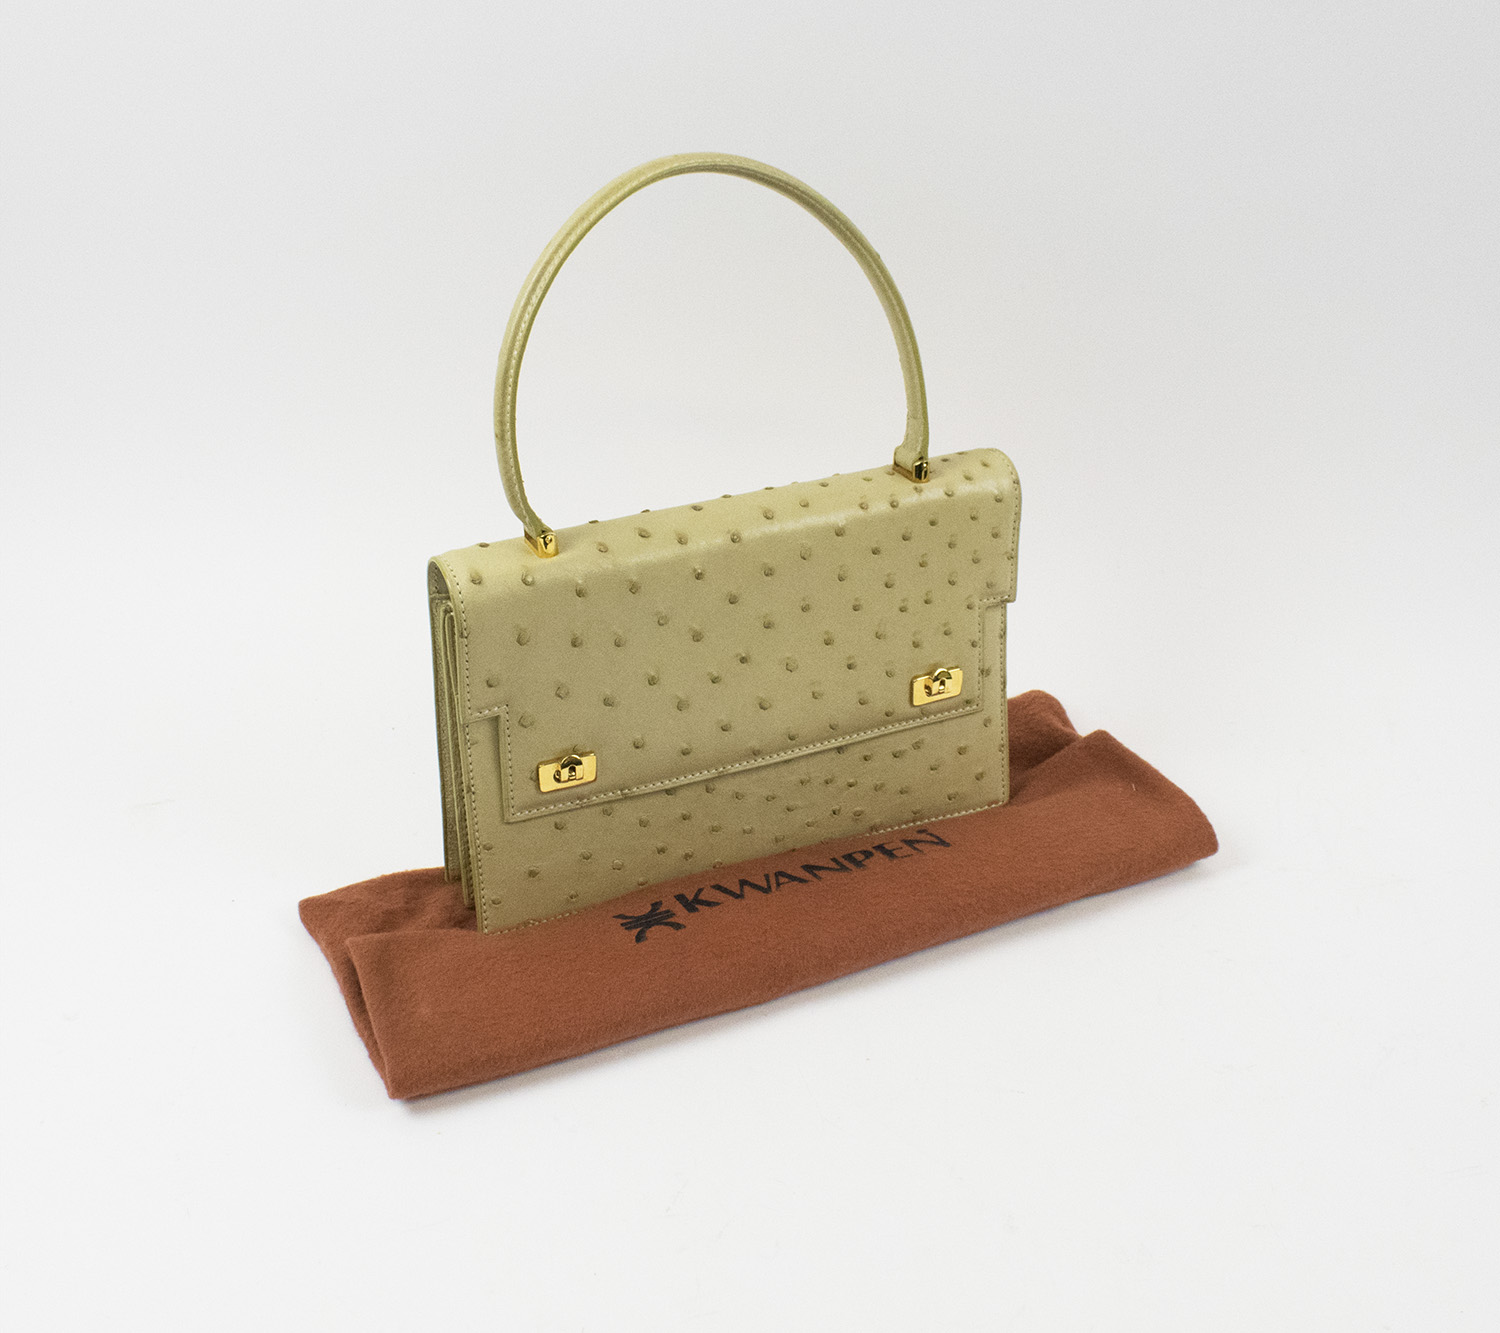 KWANPEN OSTRICH HANDBAG, gold tone hardware with single top handle, flip  lock closures at the front, cream leather lining, with two sections and two  internal pockets one with zip, plus and external